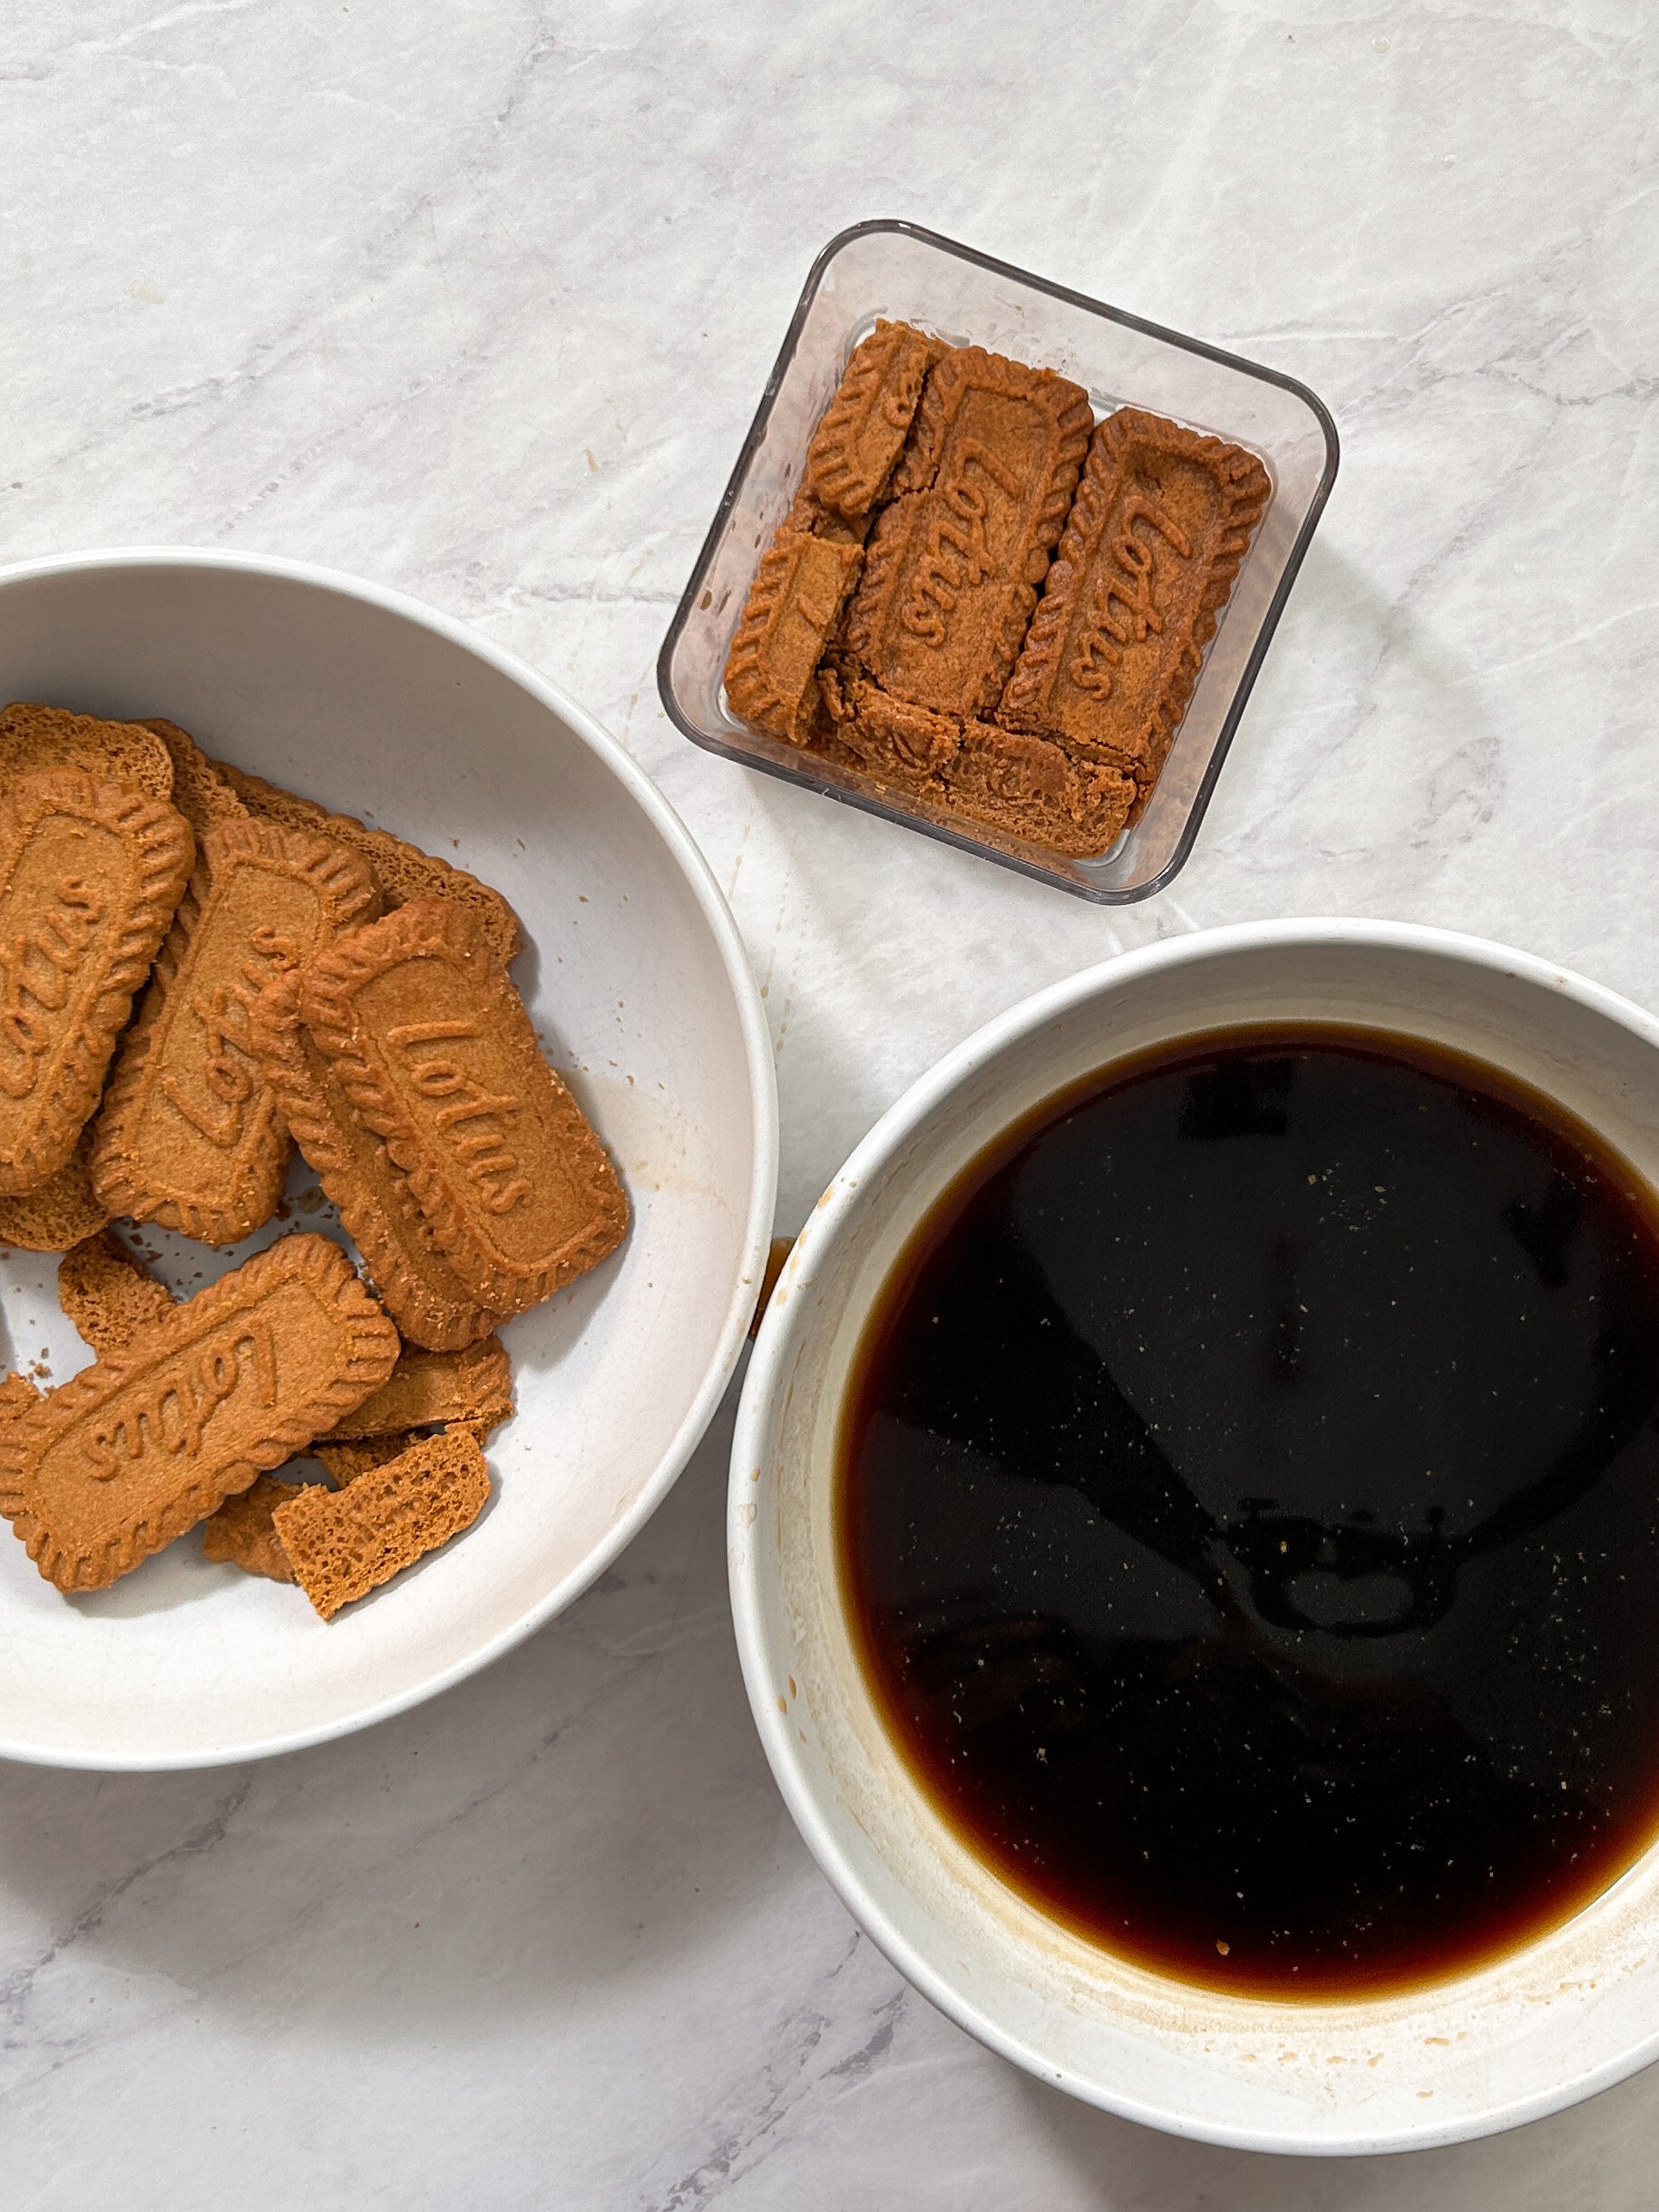 a plate with biscoff cookies, a bowl with coffee, and a dessert cup with a layer of soaked biscoff cookies